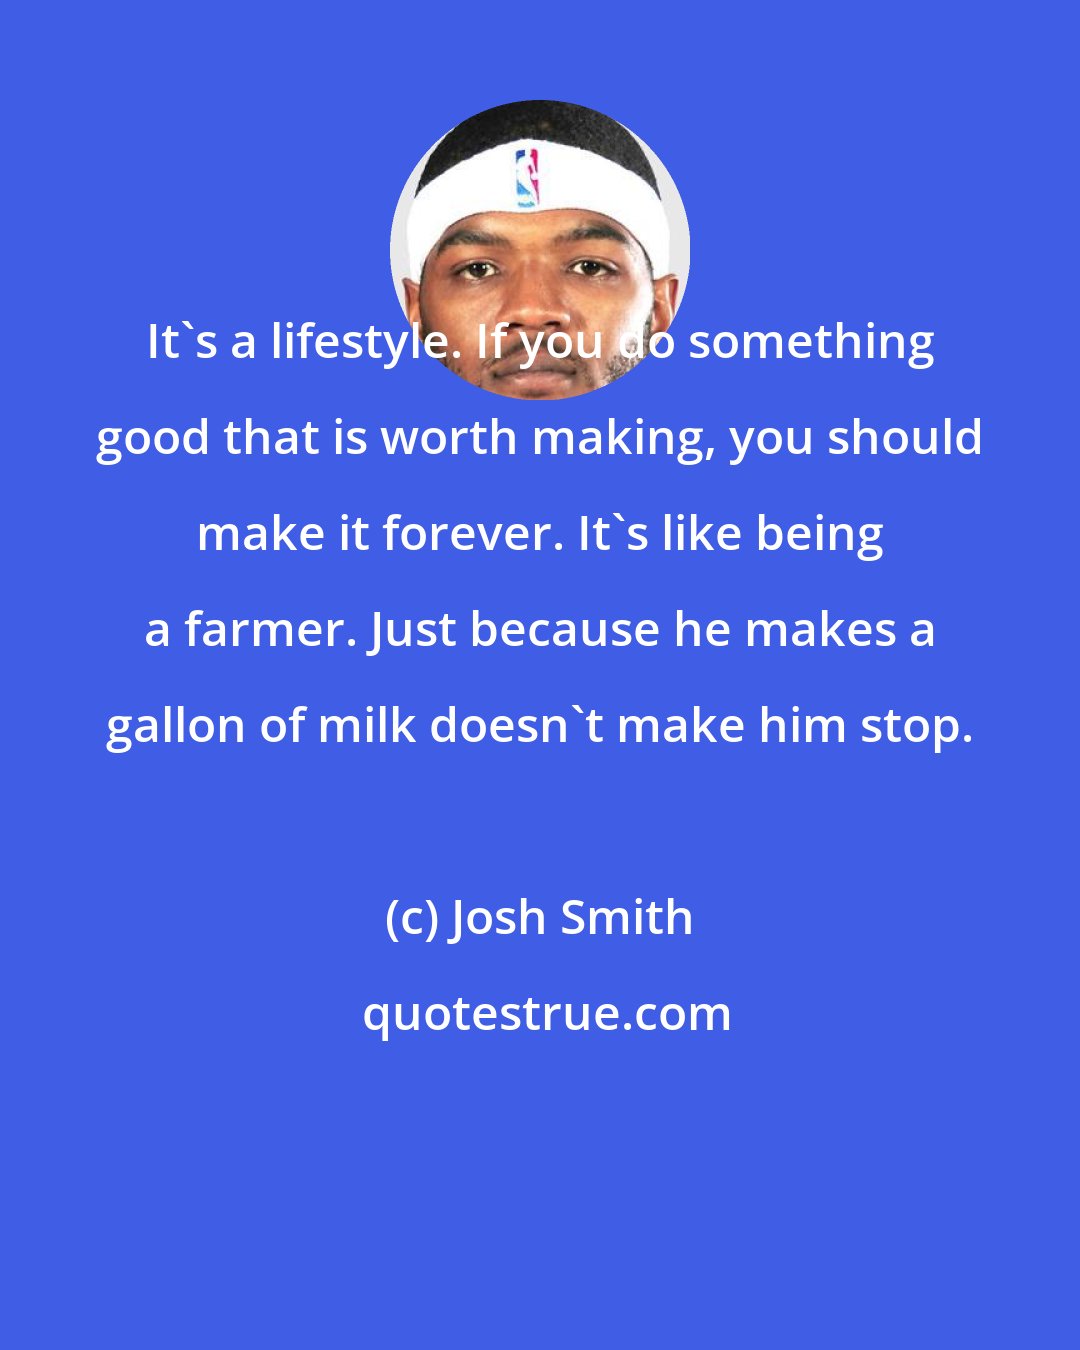 Josh Smith: It's a lifestyle. If you do something good that is worth making, you should make it forever. It's like being a farmer. Just because he makes a gallon of milk doesn't make him stop.